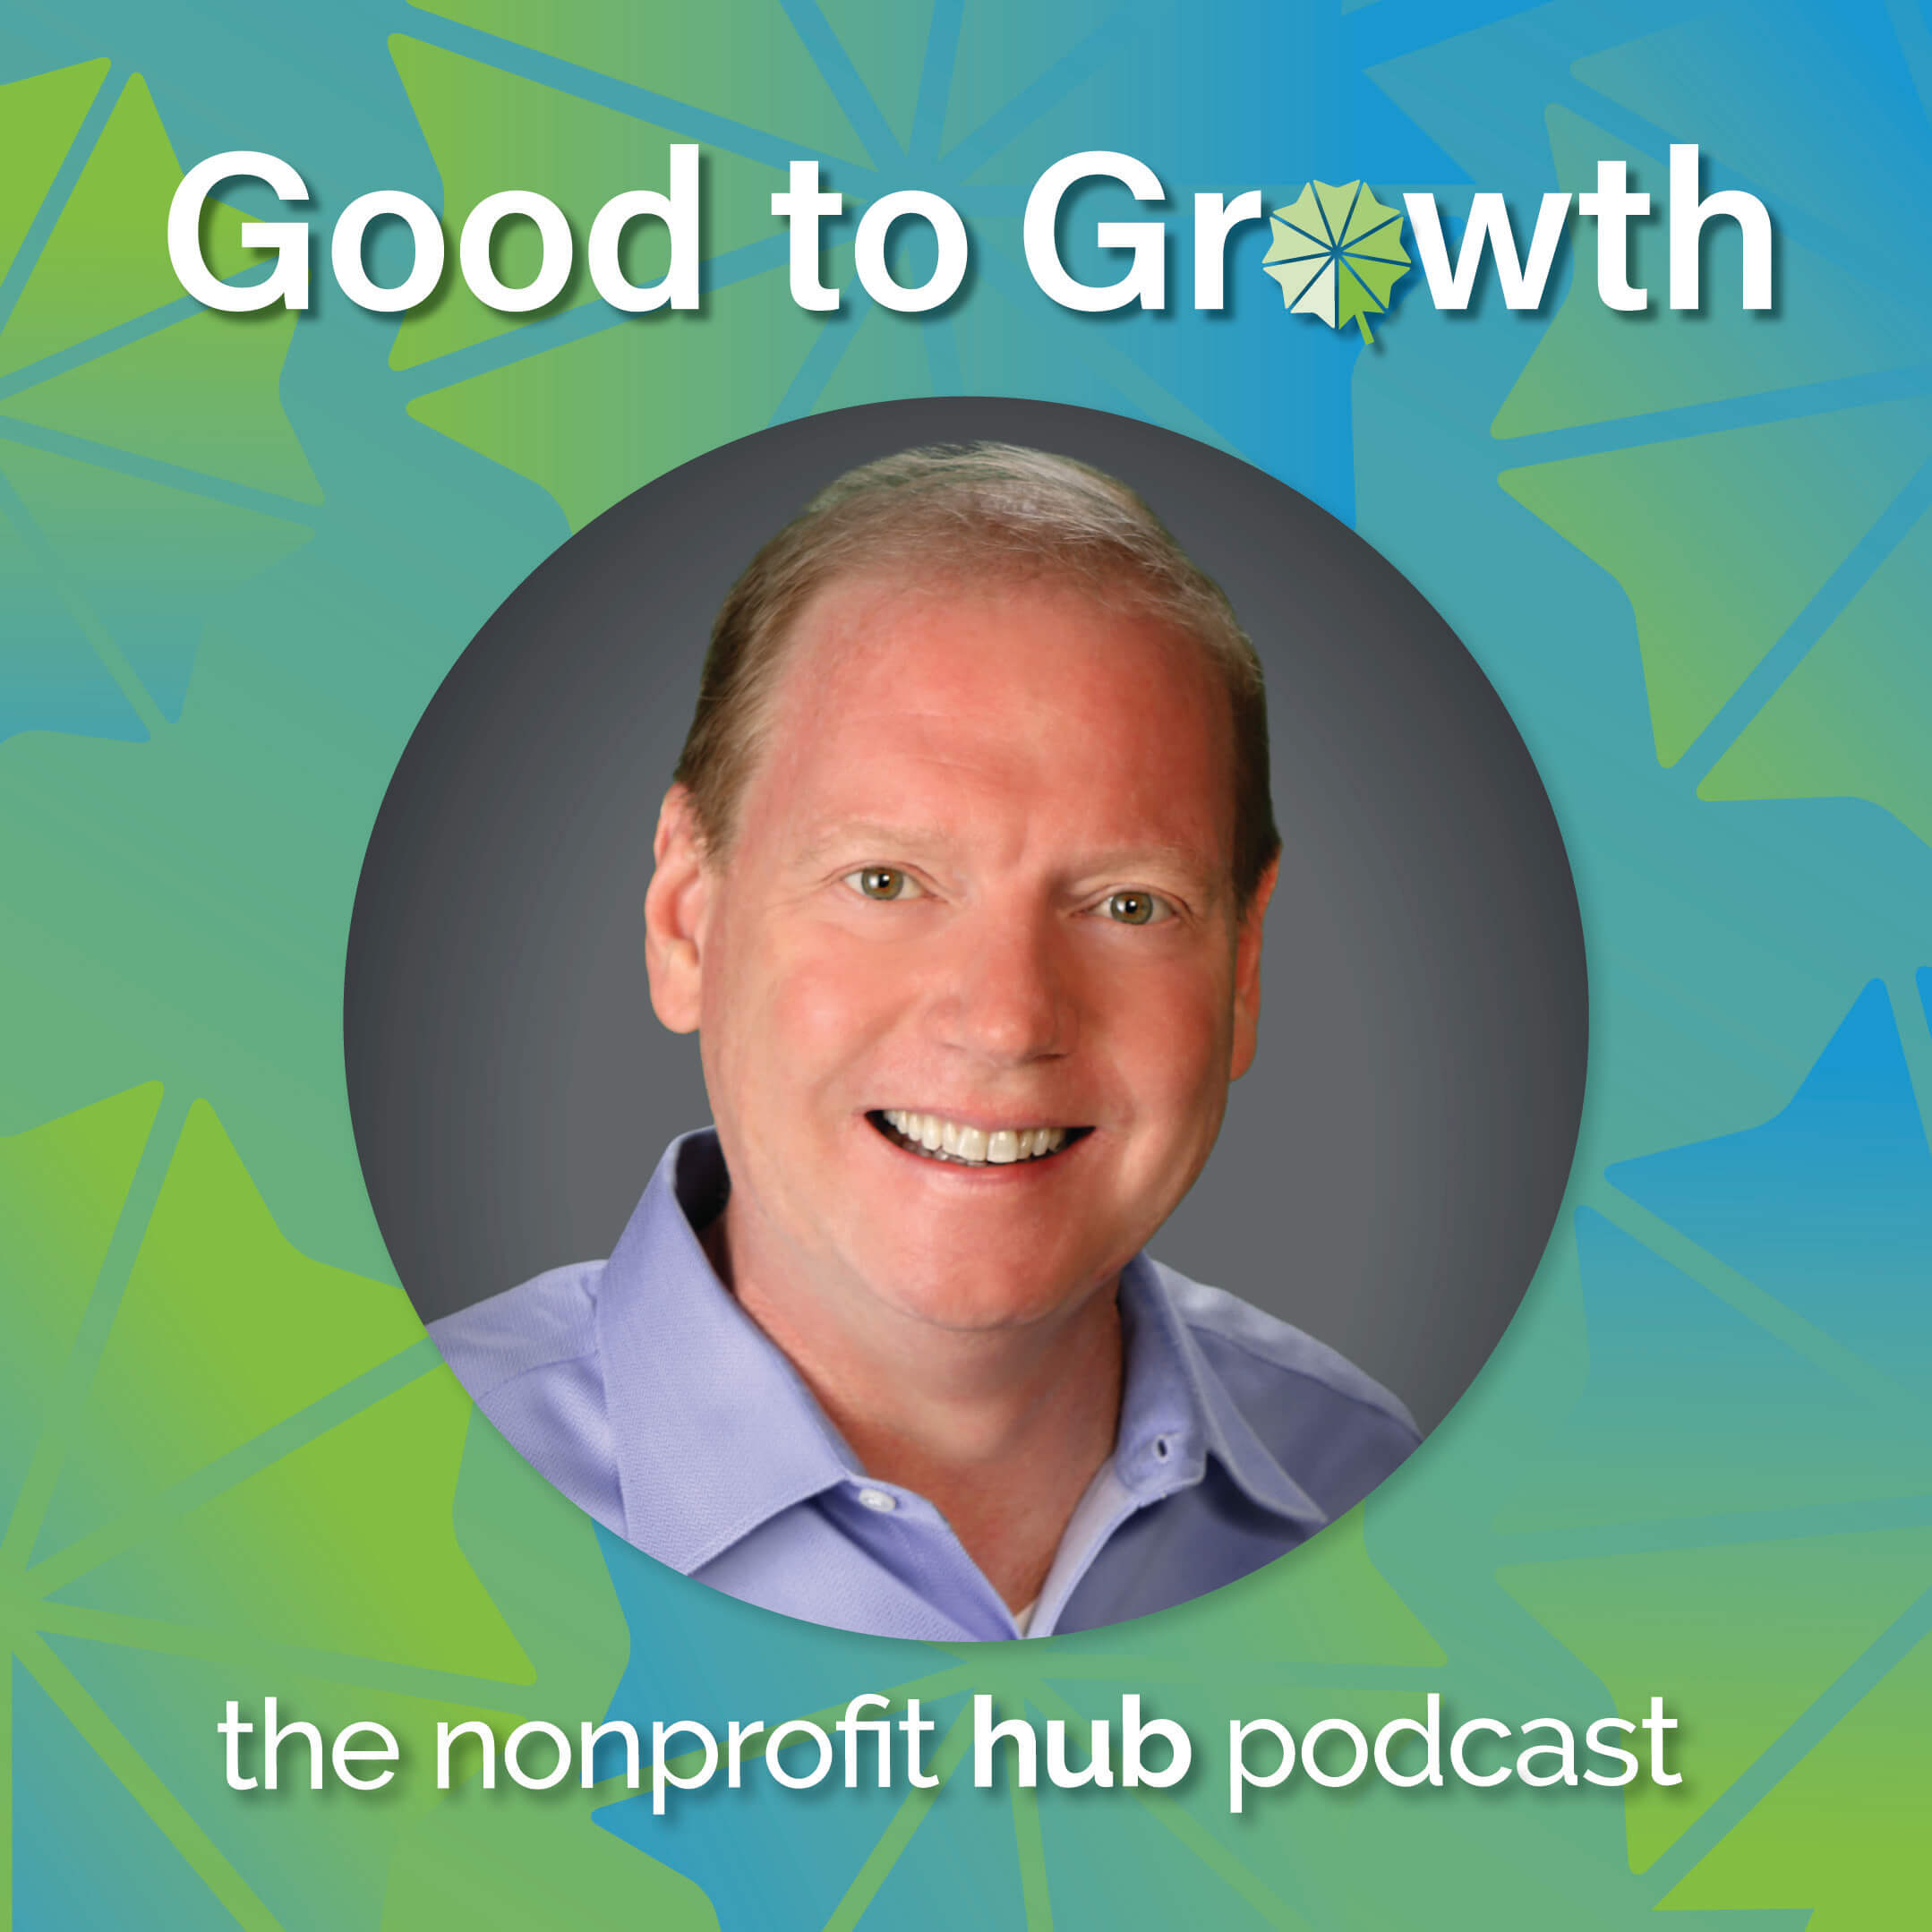 Stephen King Good to Growth Podcast